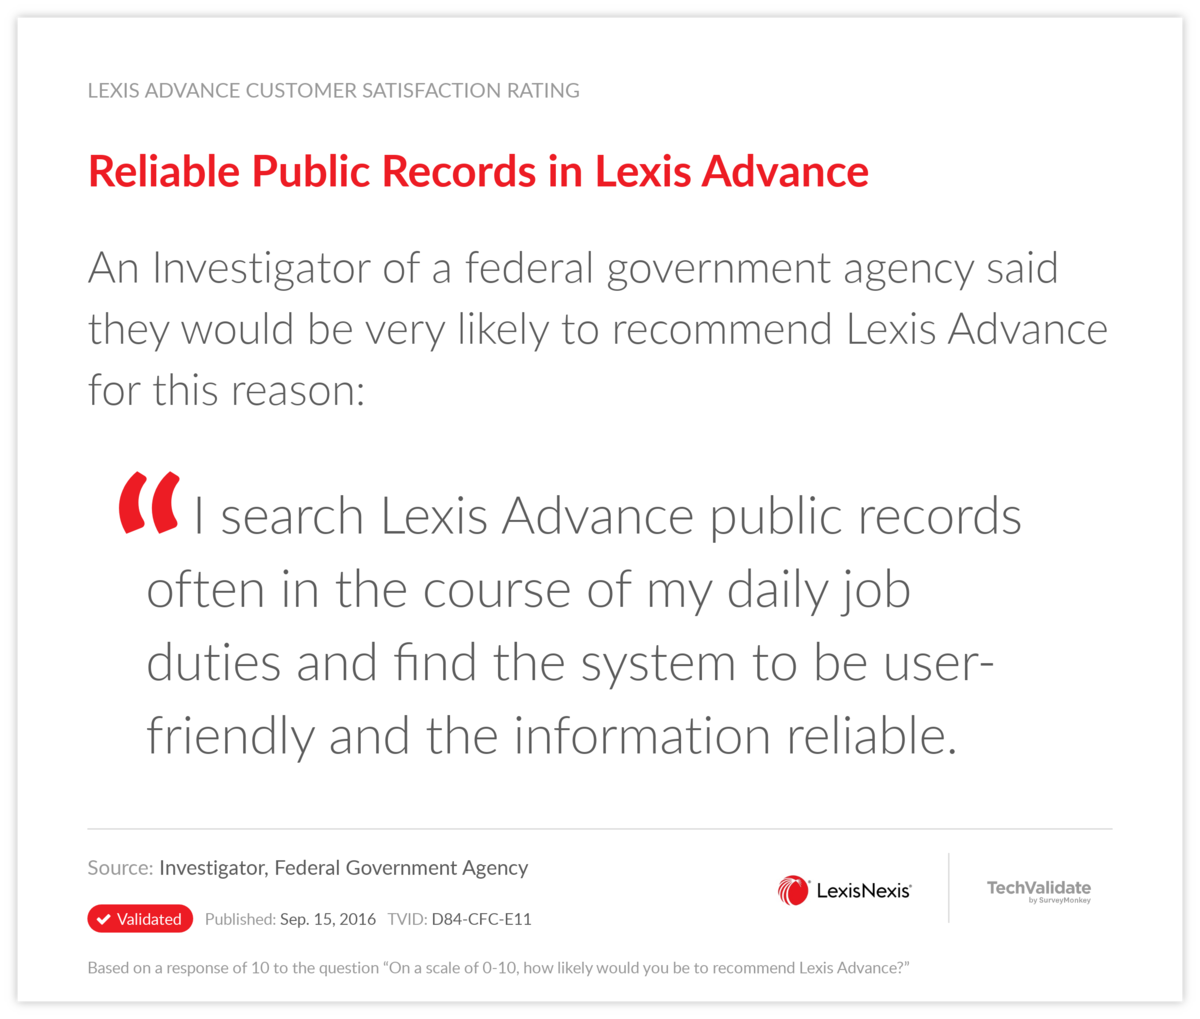 Reliable Public Records in Lexis Advance